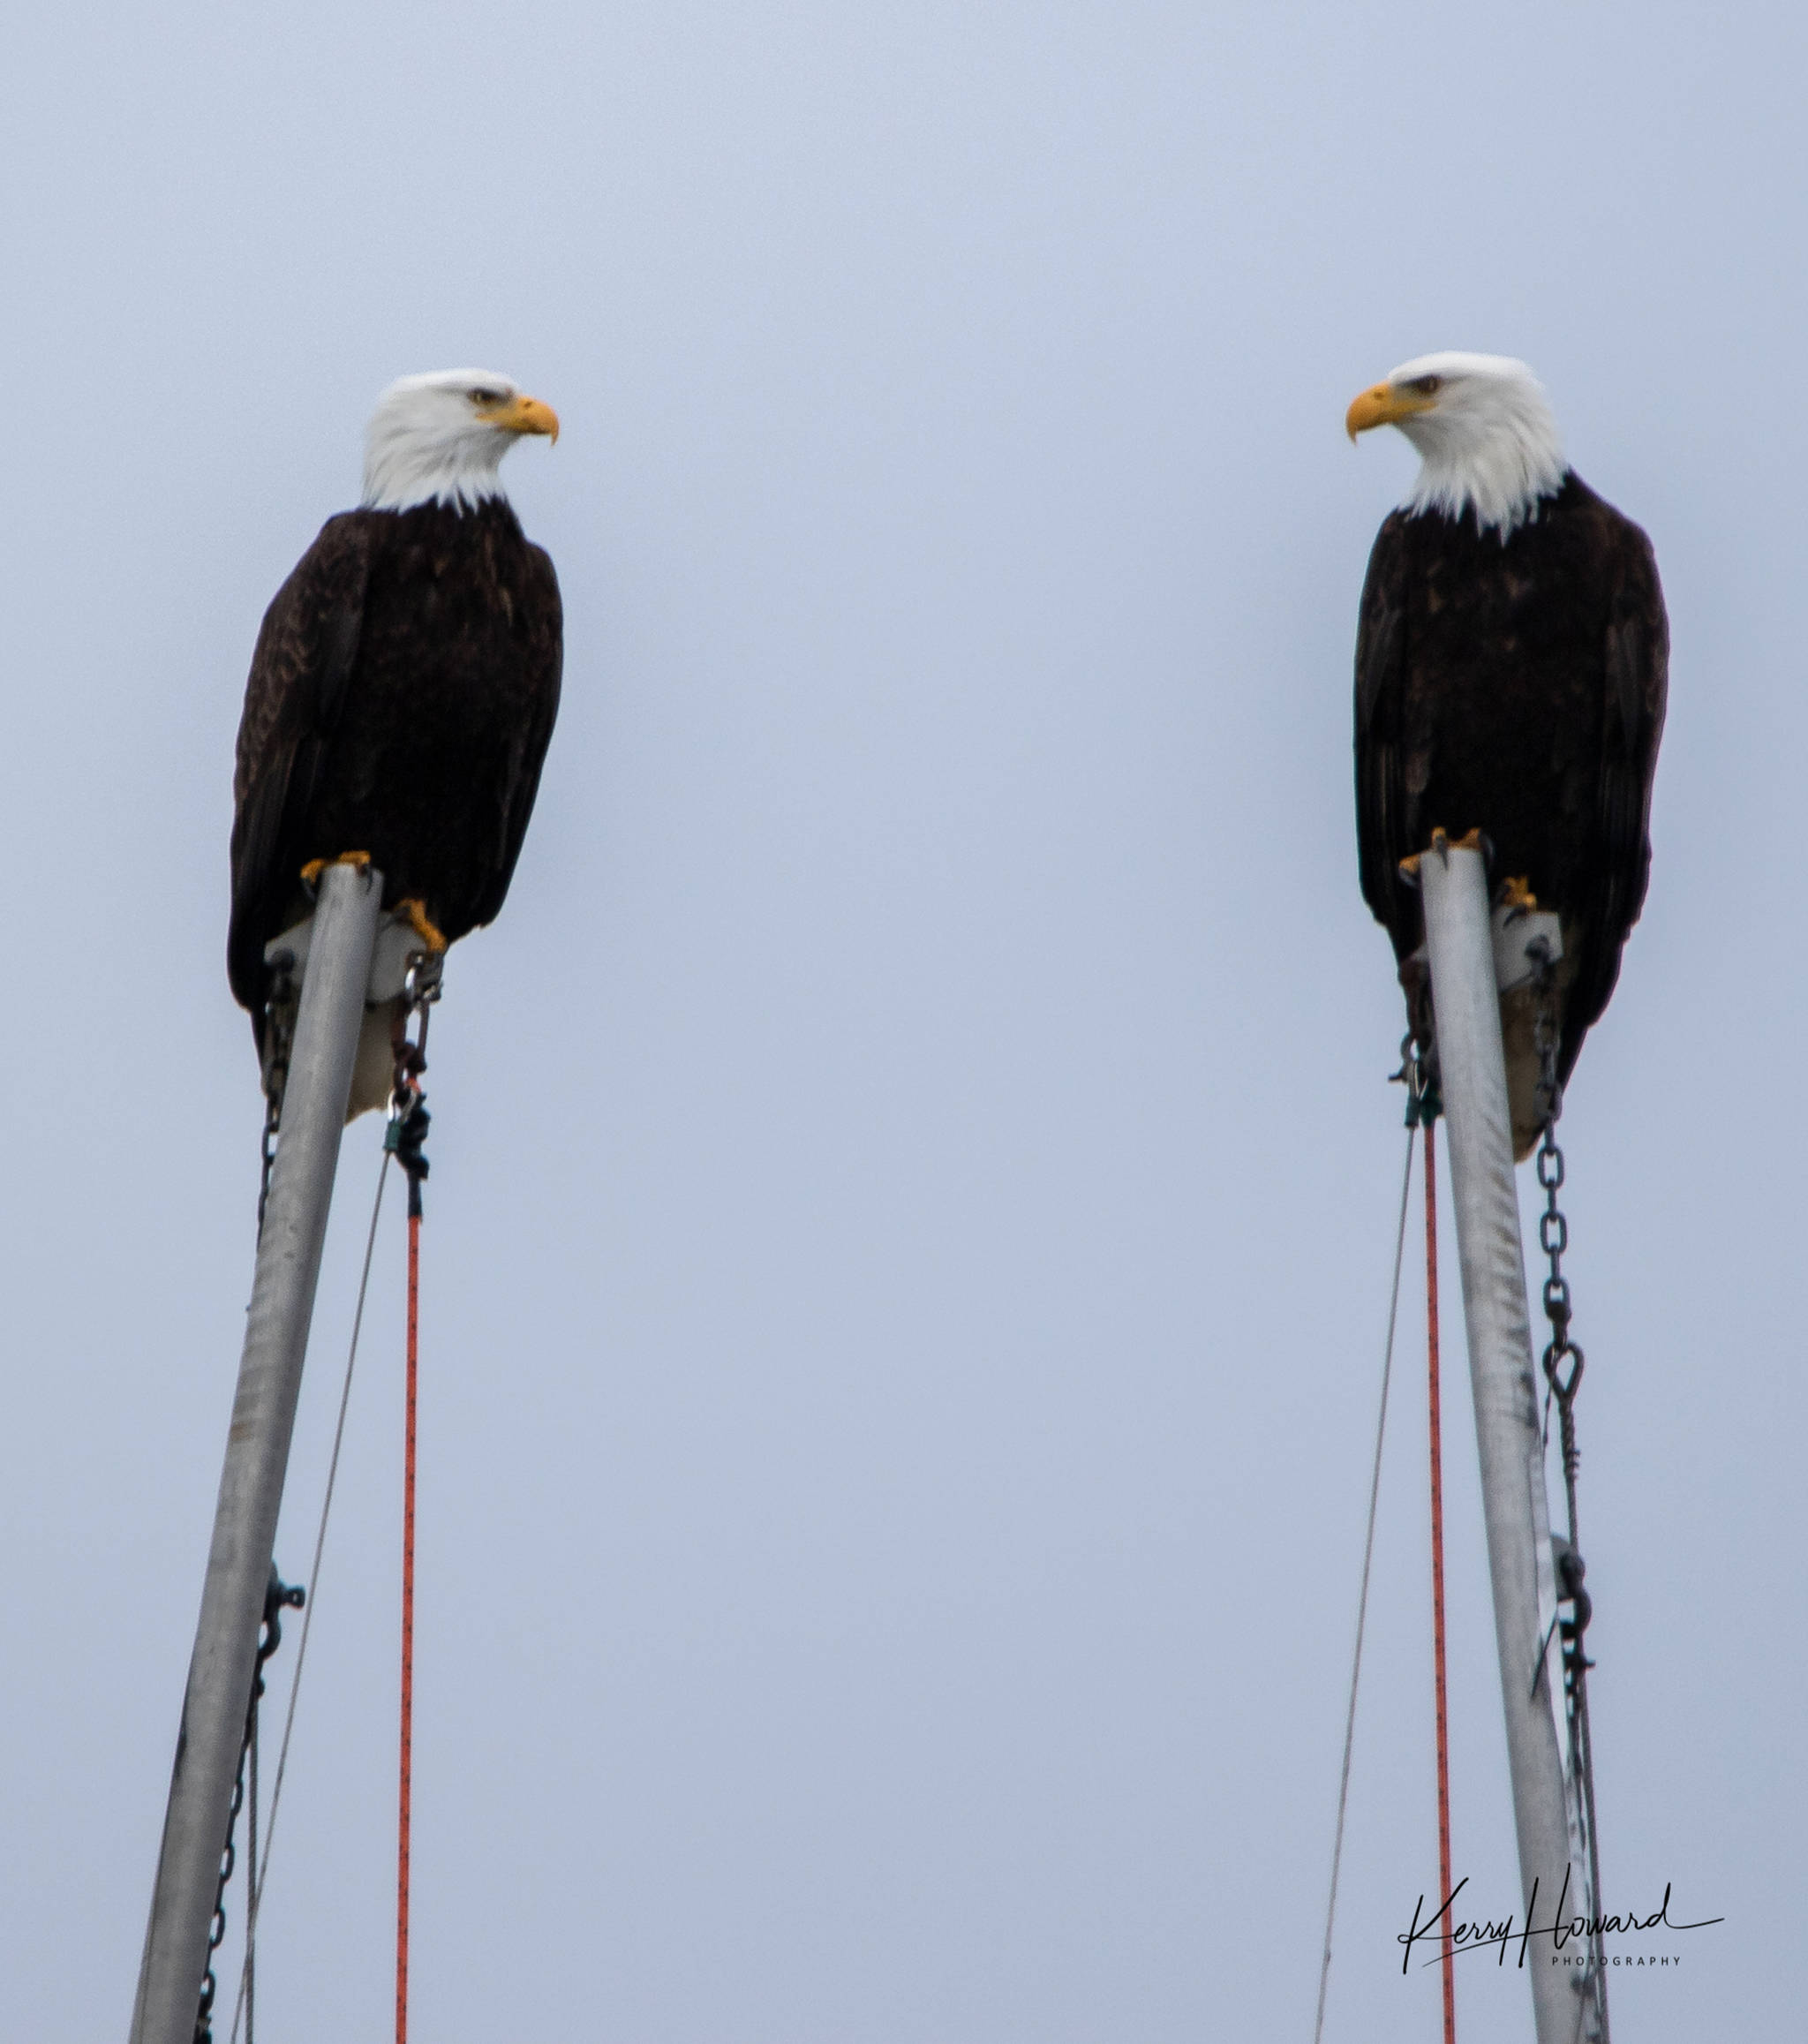 Bald eagle bookends in the boat harbor on March 11, 2019. (Courtesy Photo | Kerry Howard)